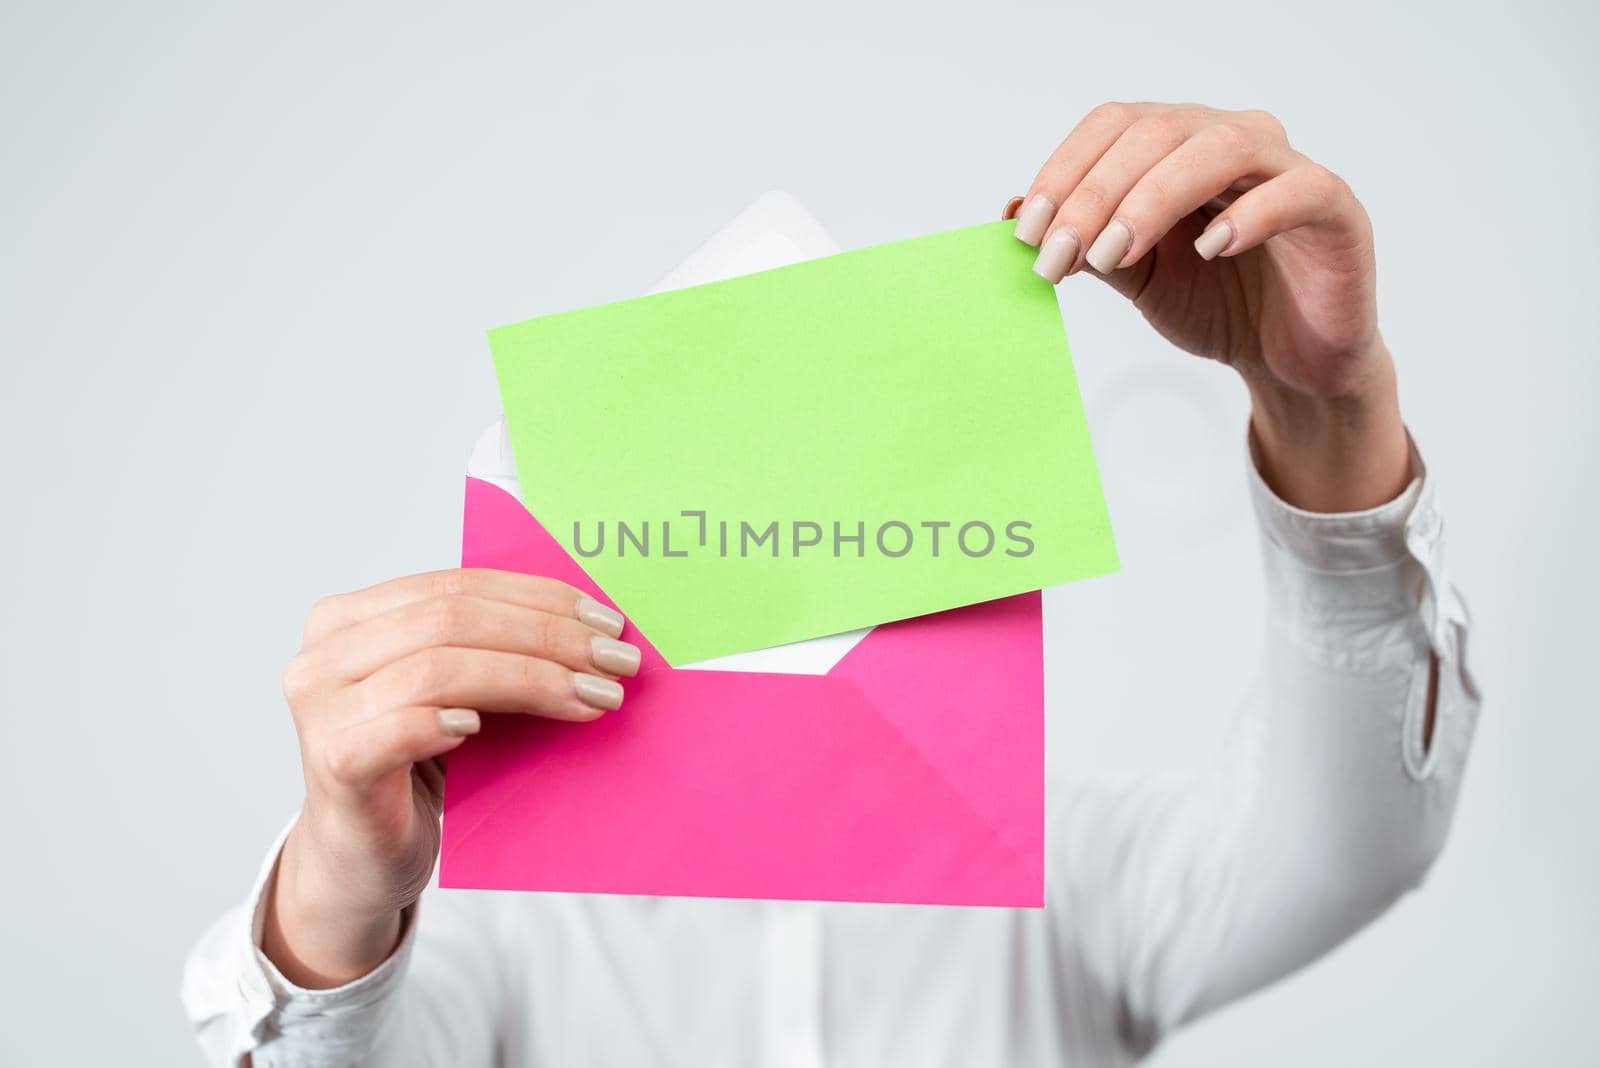 Hands Of Female Professional Putting Letter With Crucial Message In Envelope. Businesswoman Having Document In Hands Sending Important Information Through Post. by nialowwa